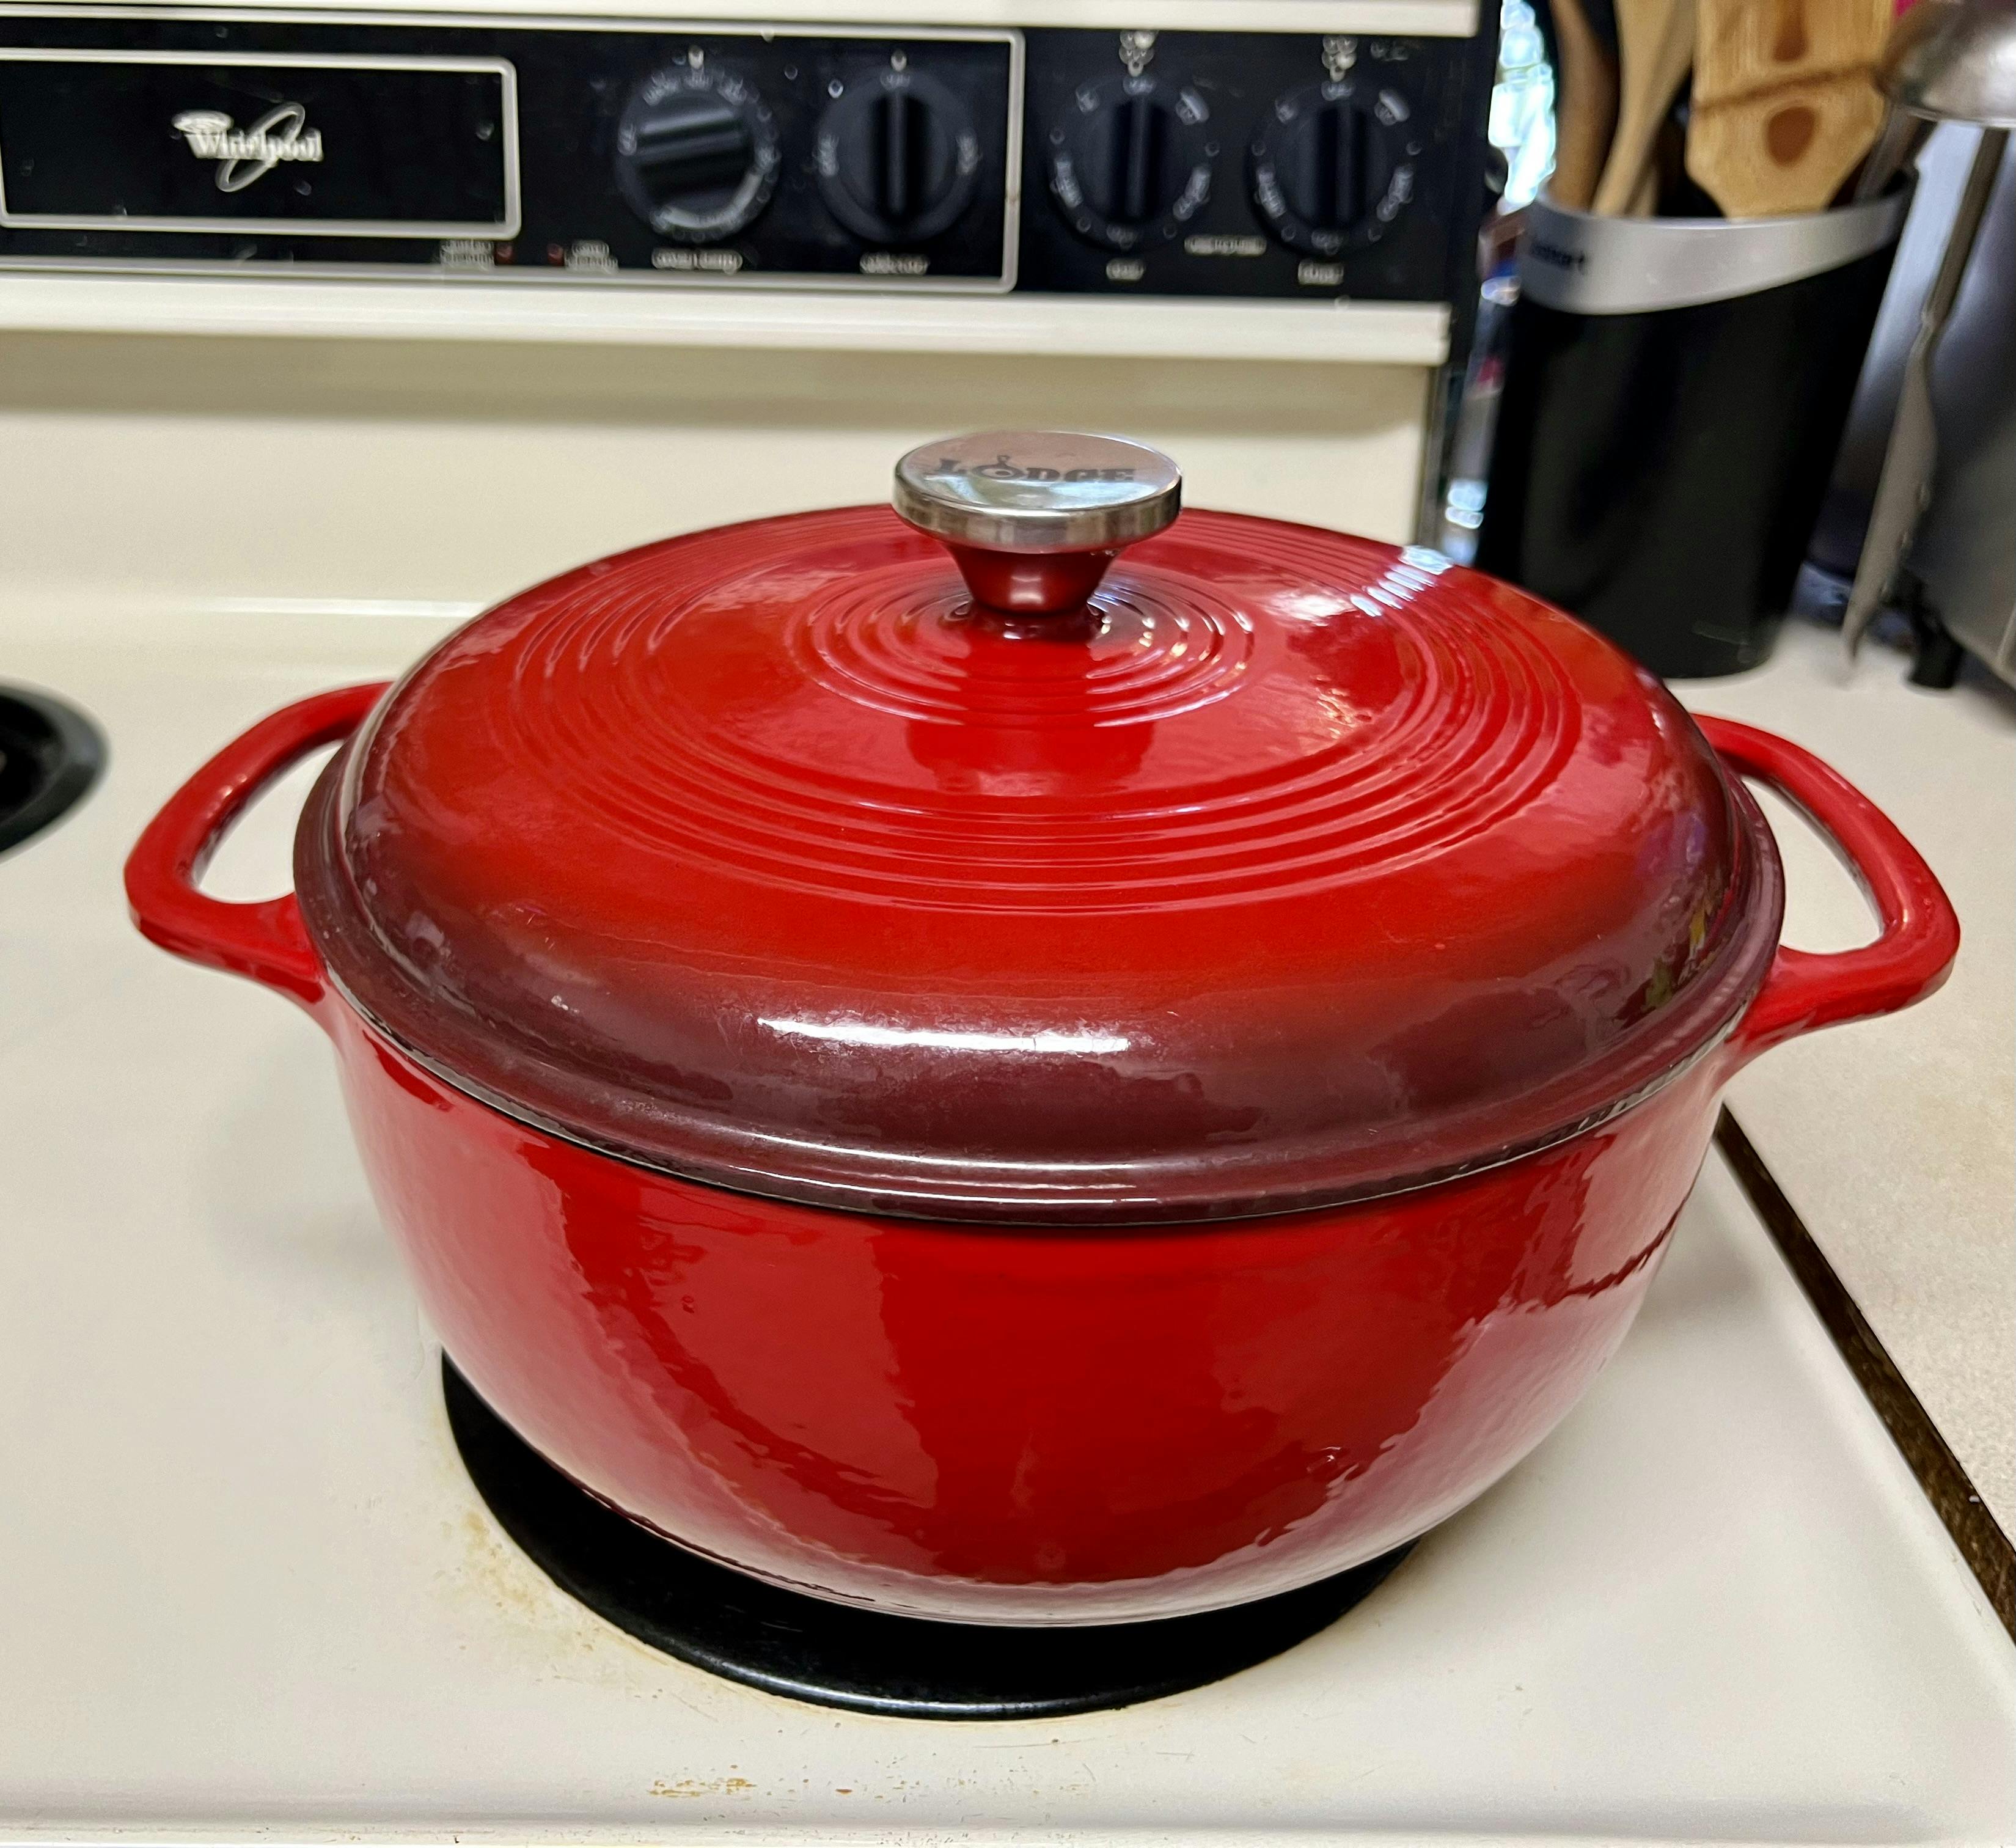 Lodge 7.5-Qt. Cherry on Top Red USA Enameled Cast Iron Dutch Oven